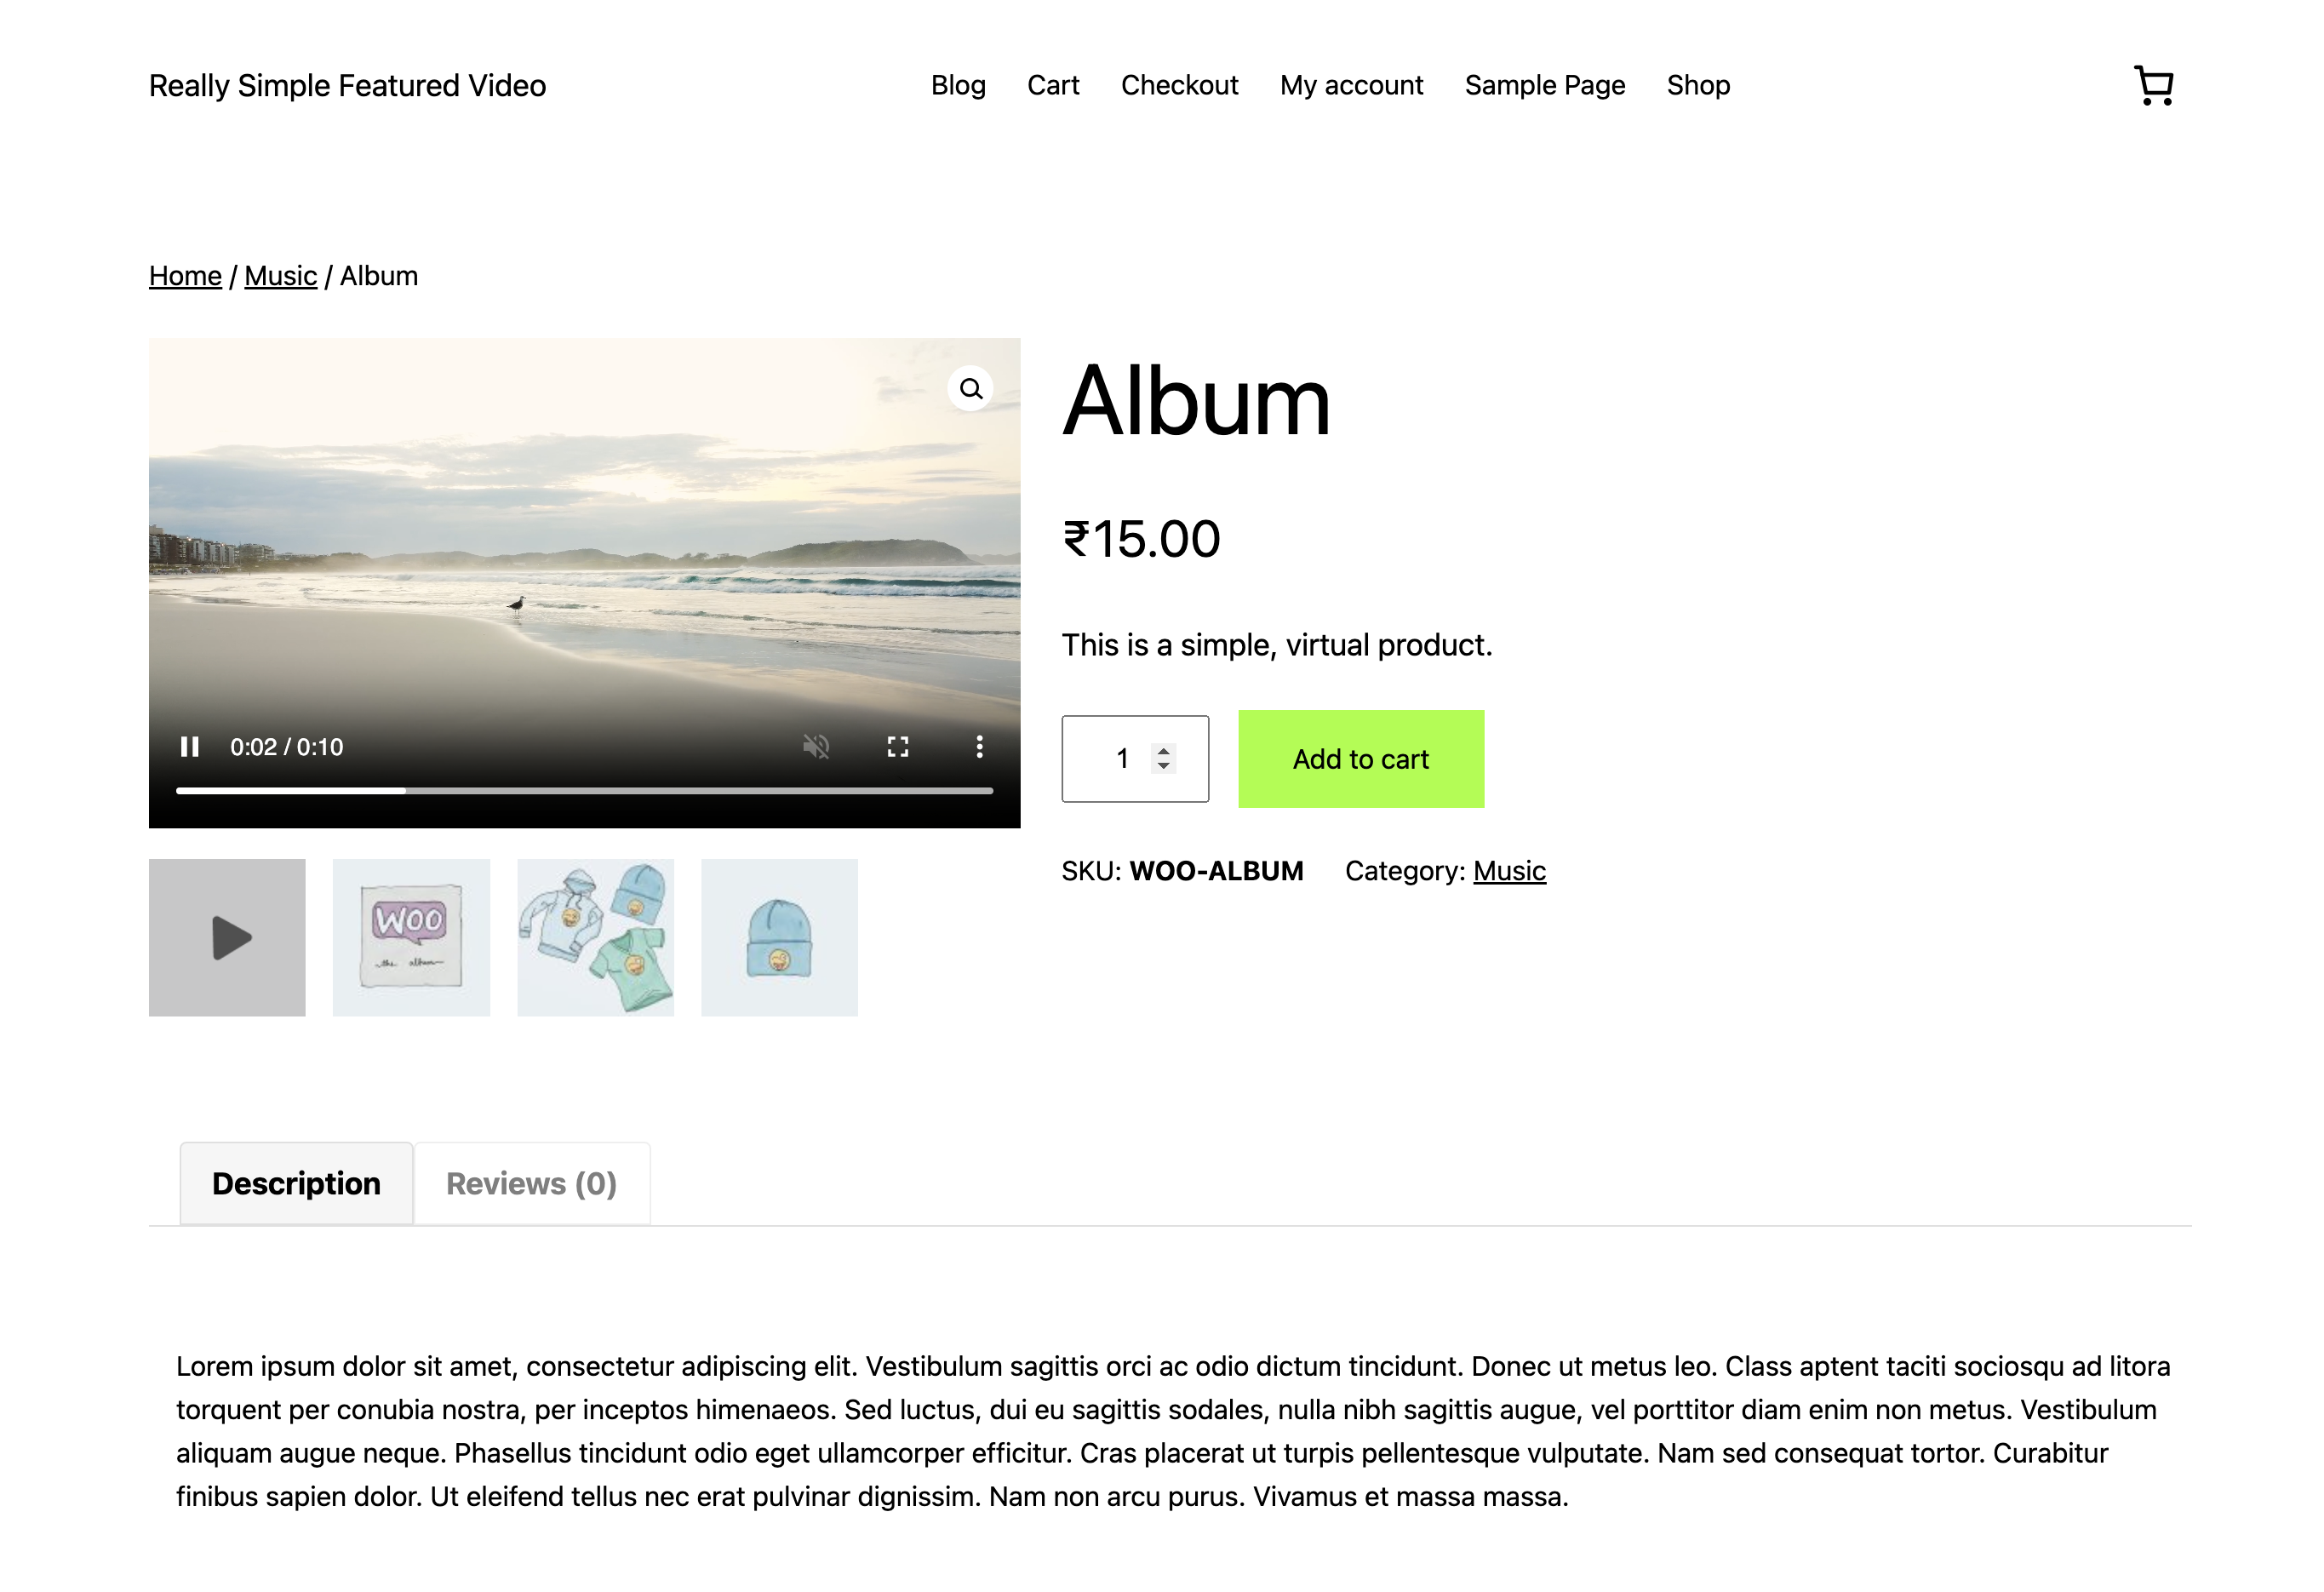 WooCommerce Product page with self-hosted Featured Video.